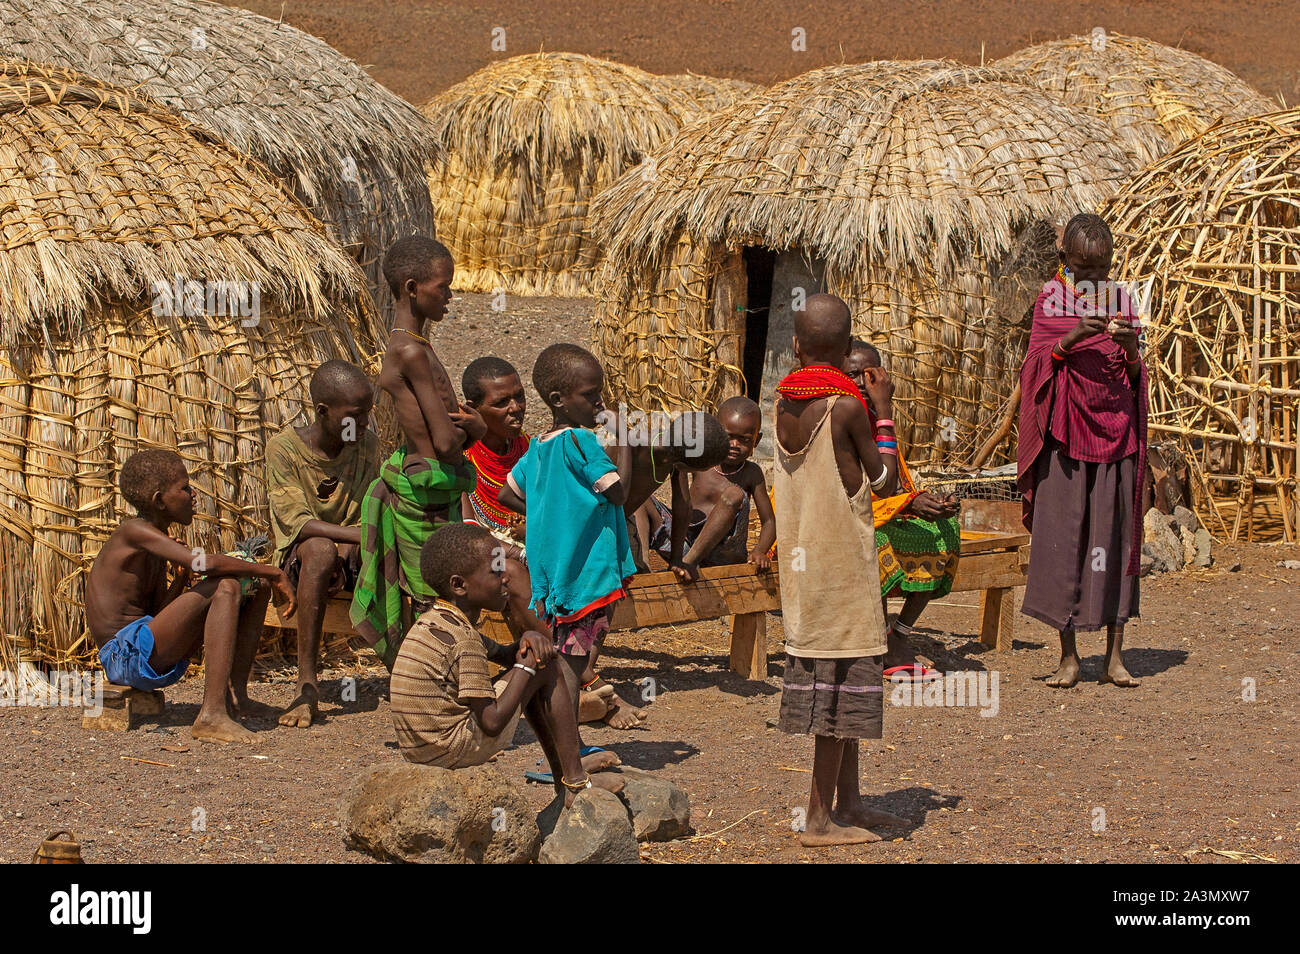 Boys and girls from the El Molo tribe playing near their typical huts made of straw on their village on the shores of Lake Turkana, Kenya Stock Photo